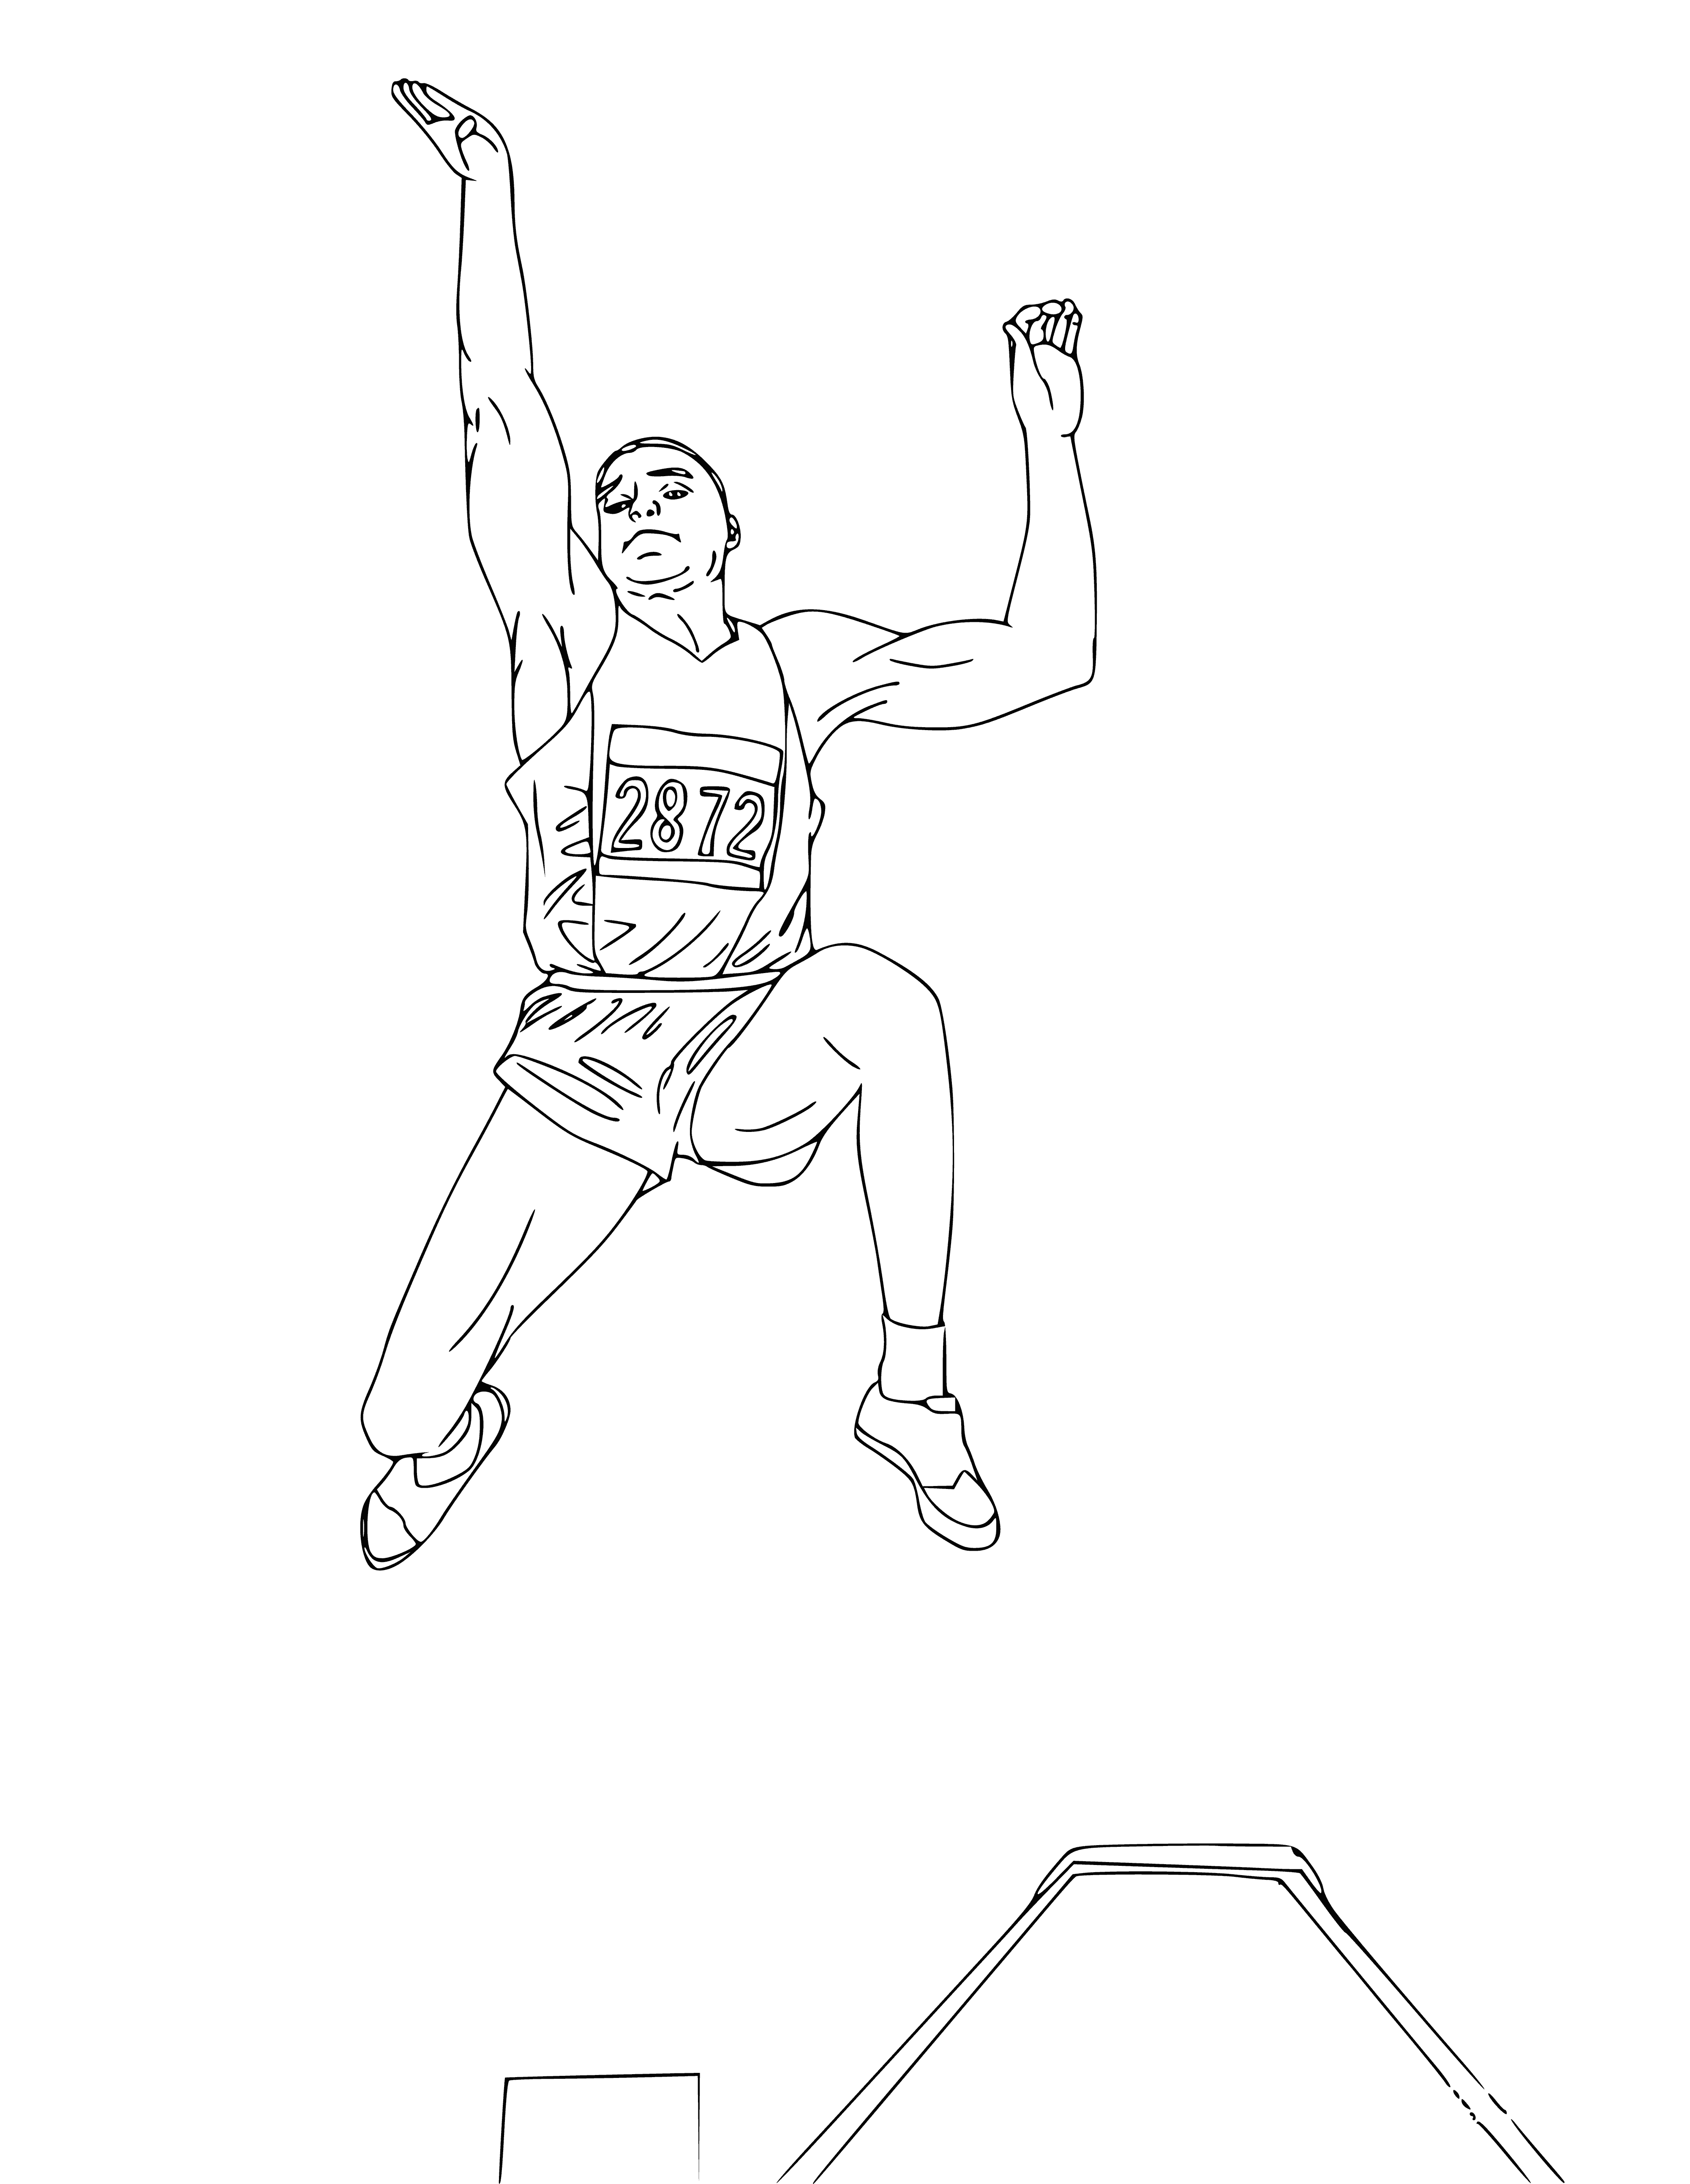 coloring page: Man long-jumping, wearing tracksuit and spikes; arms extended and legs outstretched.